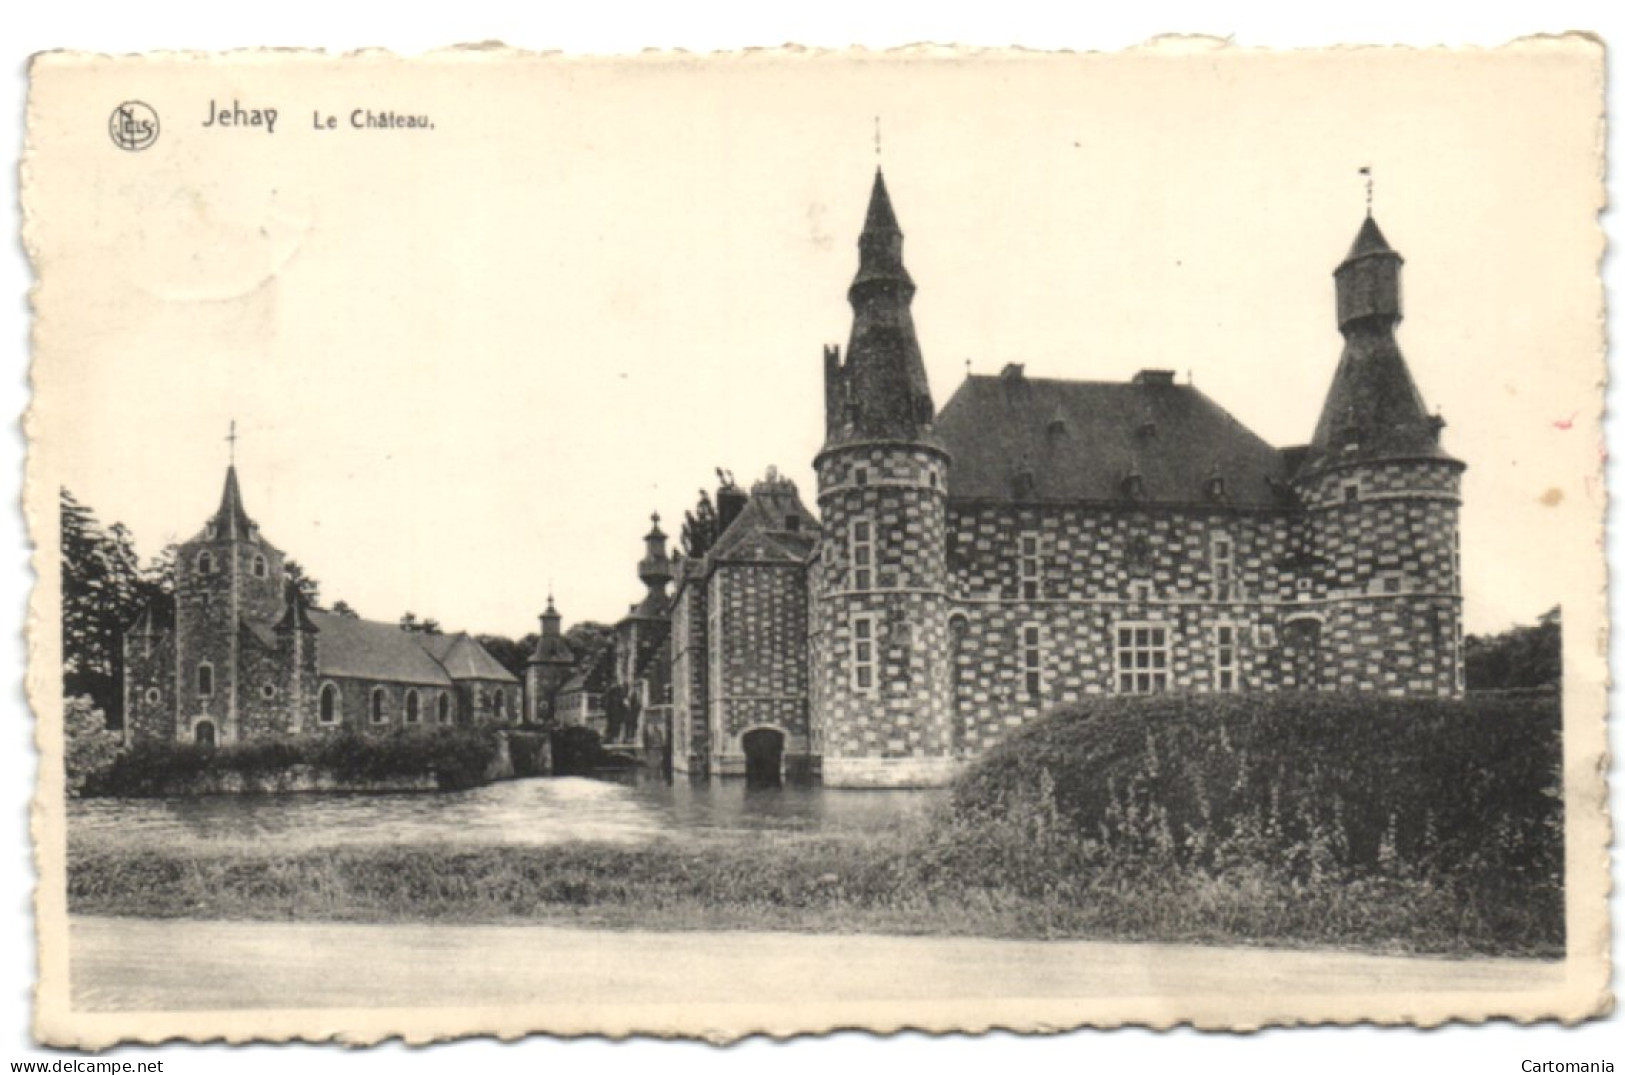 Jehay - Le Château - Amay